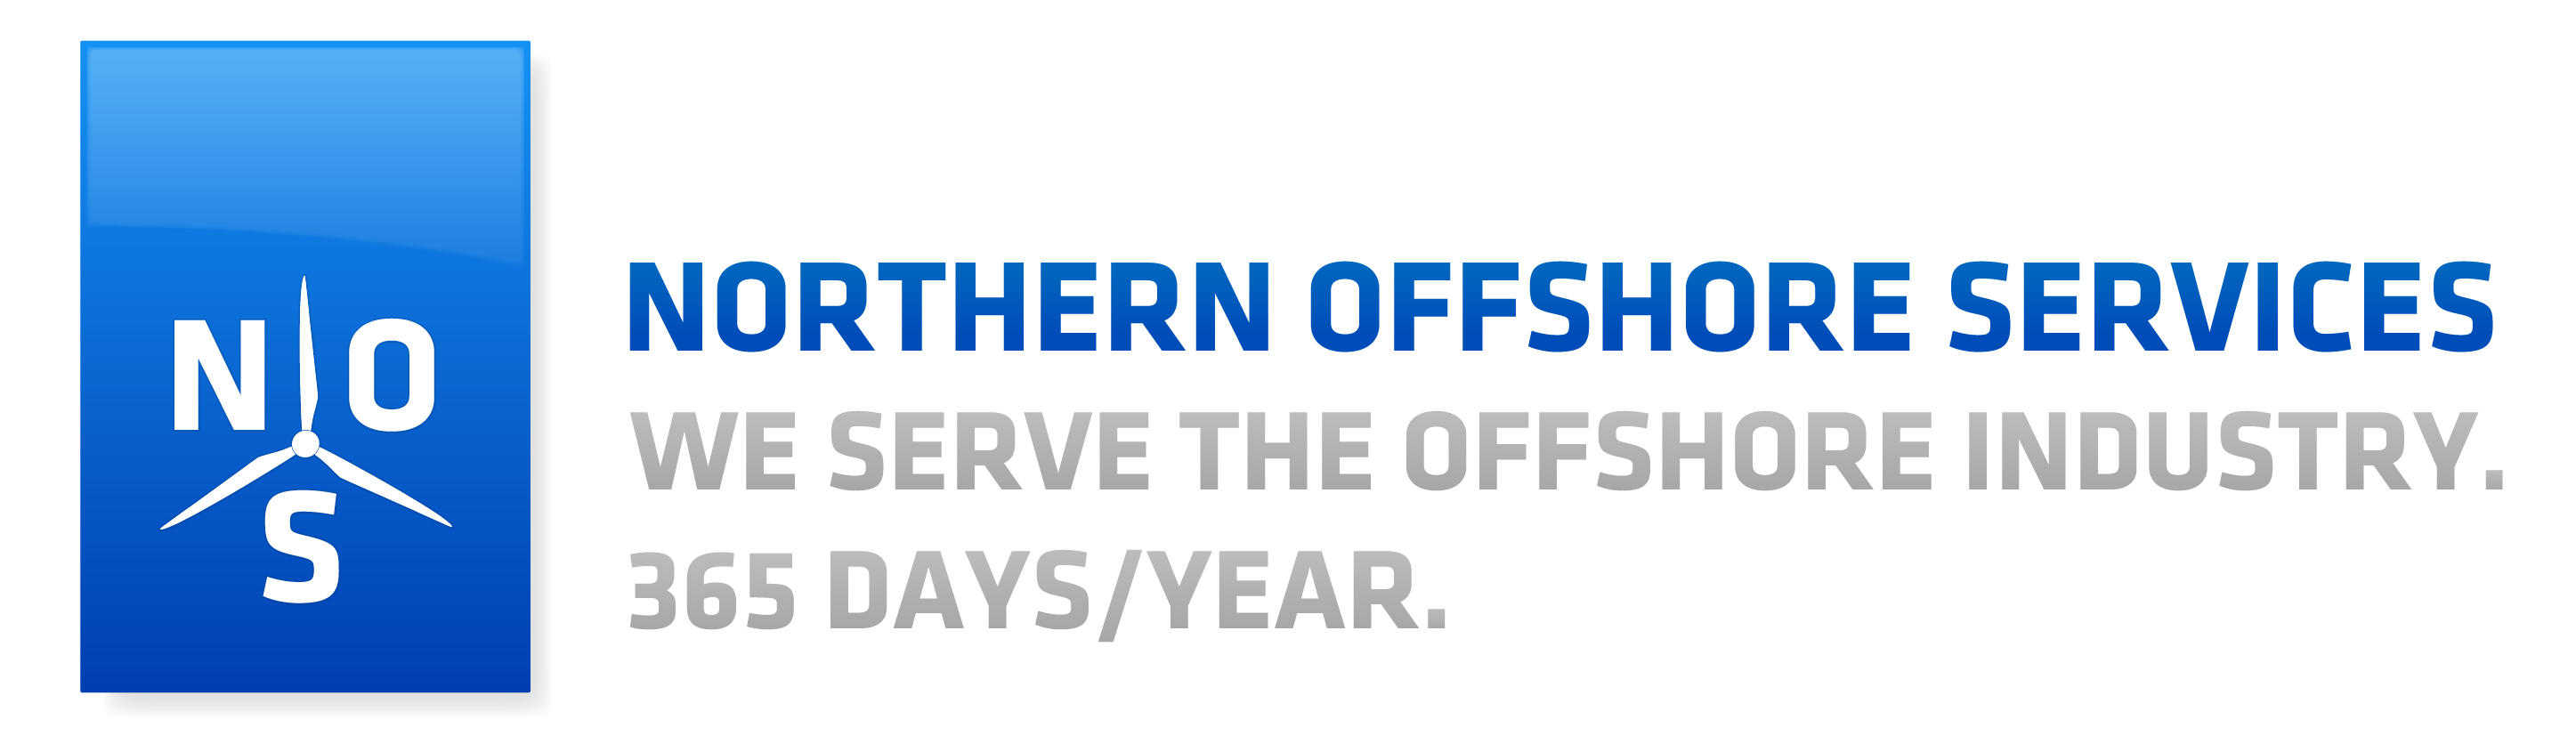 NOS NORTHERN OFFSHORE SERVICES WE SERVE THE OFFSHORE INDUSTRY. 365 DAYS/YEAR.